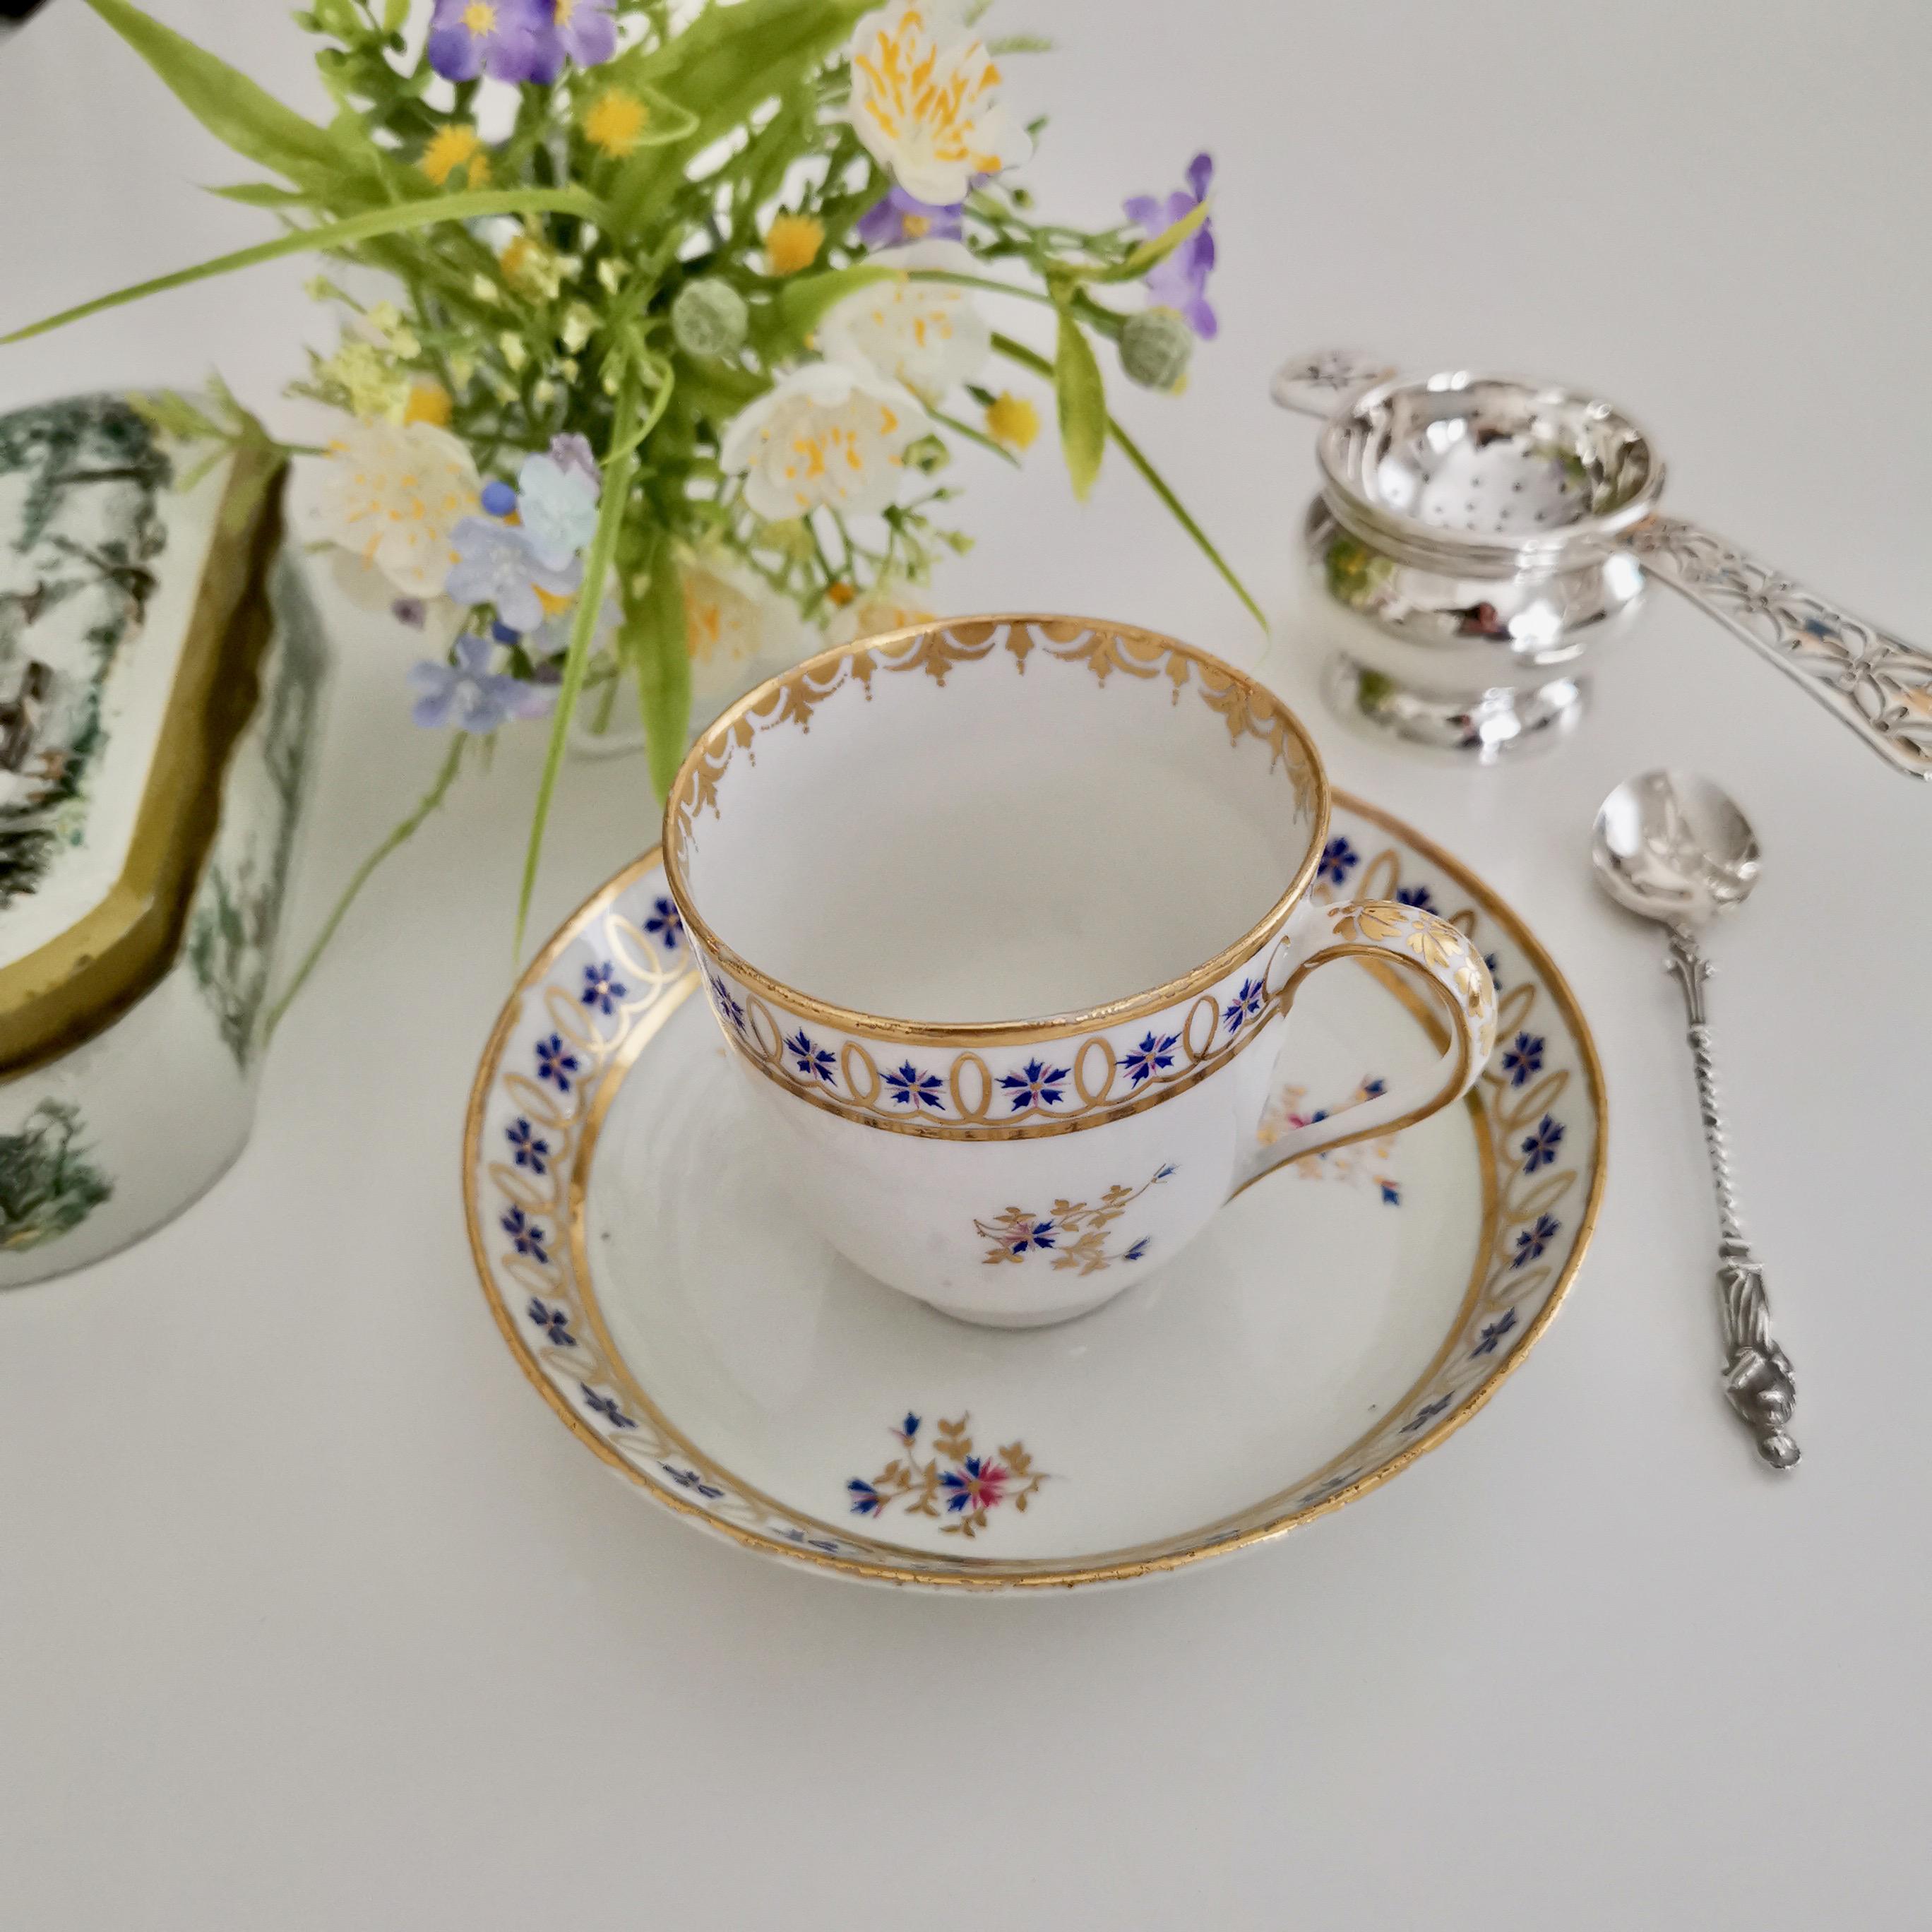 This is a beautiful little coffee cup and saucer made by the Crown Derby Porcelain Company some time between 1782 and 1790. The set has a simple white ground with a gracious pattern of little blue cornflowers set in gilt.

The set was made by the